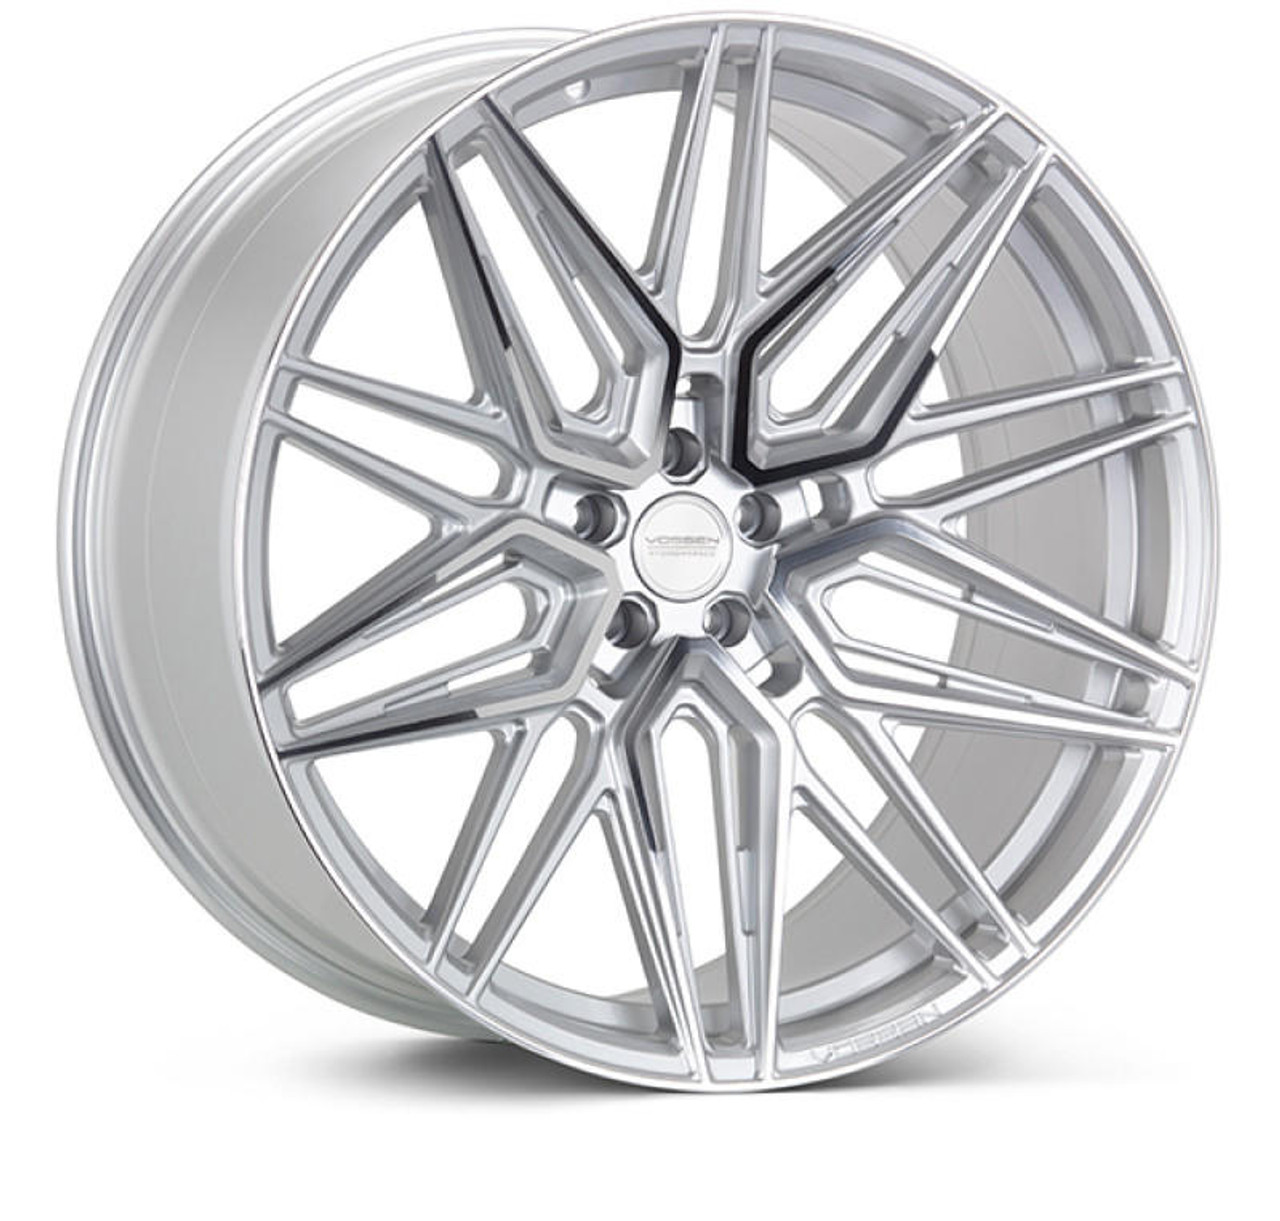  Vossen HF-7 23x10 / 5x120 / ET22 / Mid Face / 72.56 - Silver Polished - HF7-3B54 